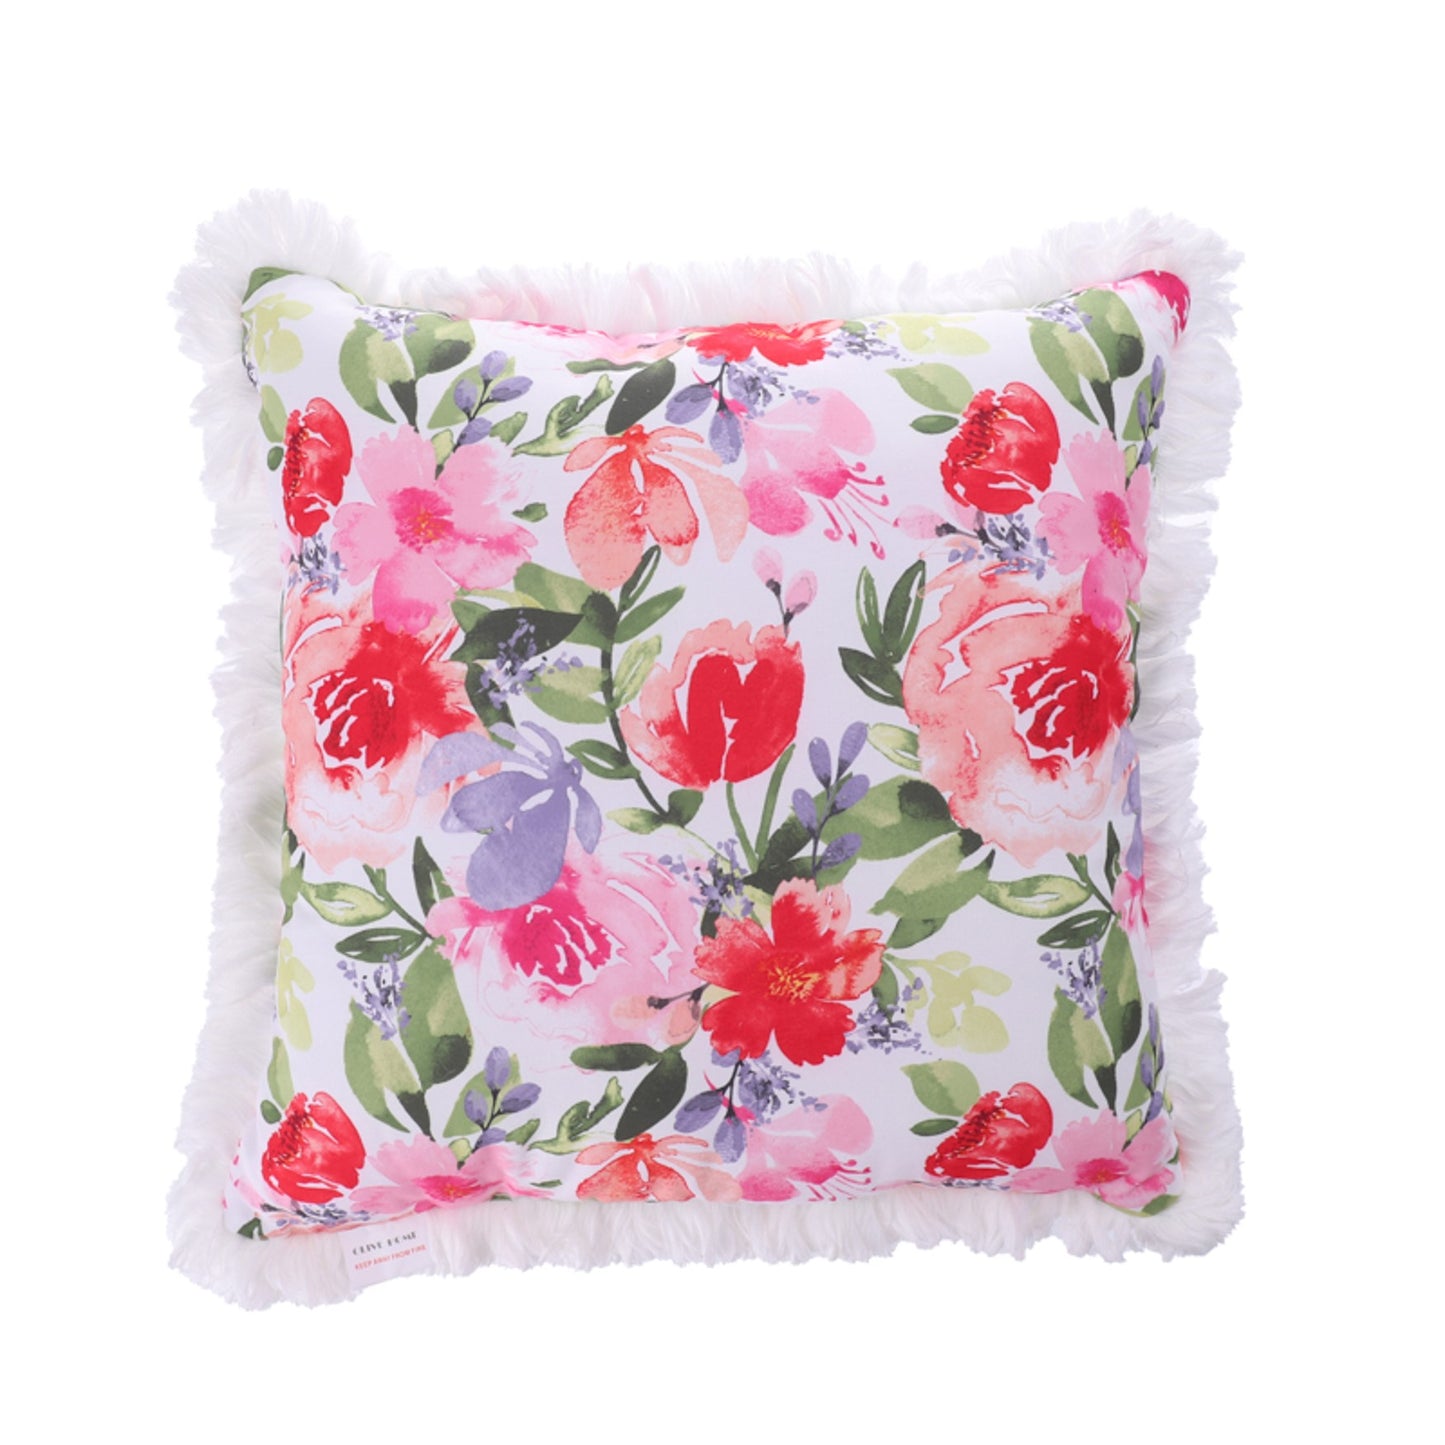 Spring Flower Throw Pillow Covers Colorful Butterfly Dragonfly Dandelion Decoration Outdoor Watercolor Cushion Home Decor for Patio Balcony Cushion